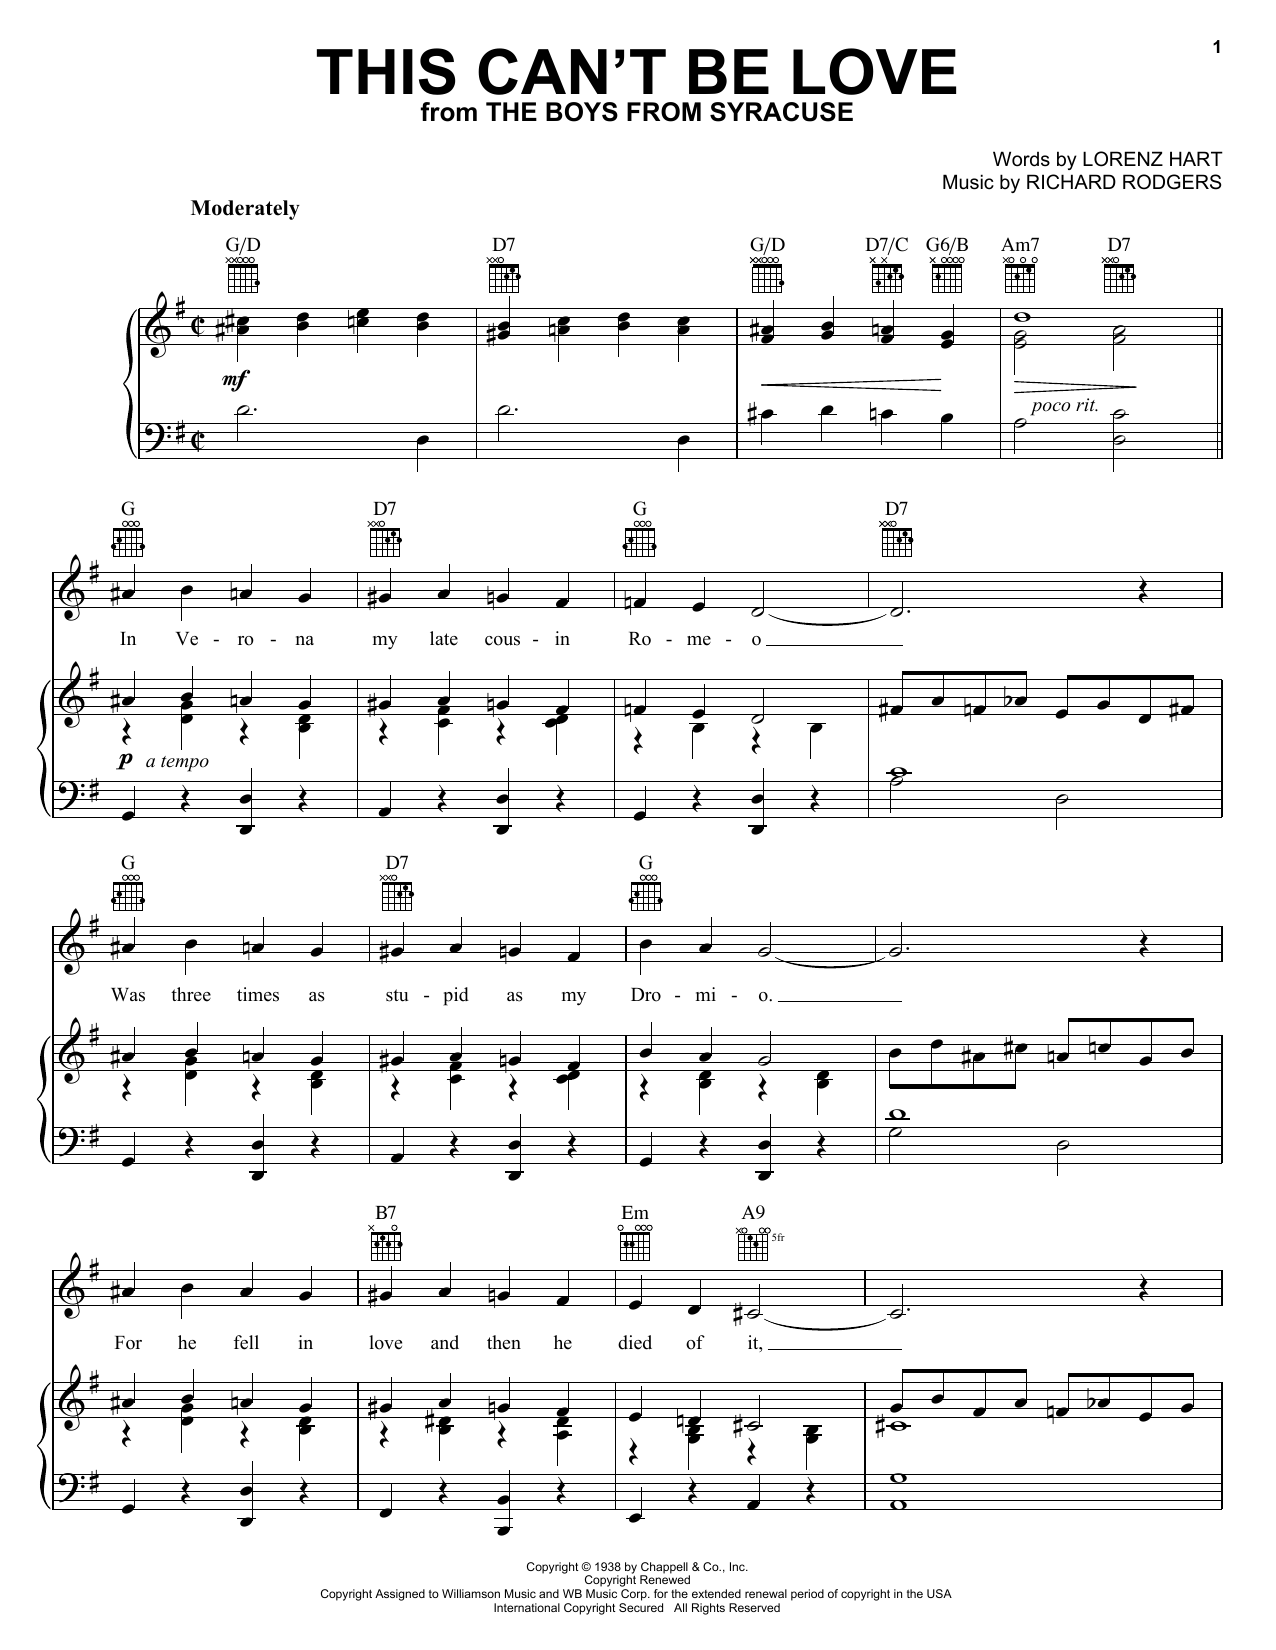 Download Diana Krall This Can't Be Love Sheet Music